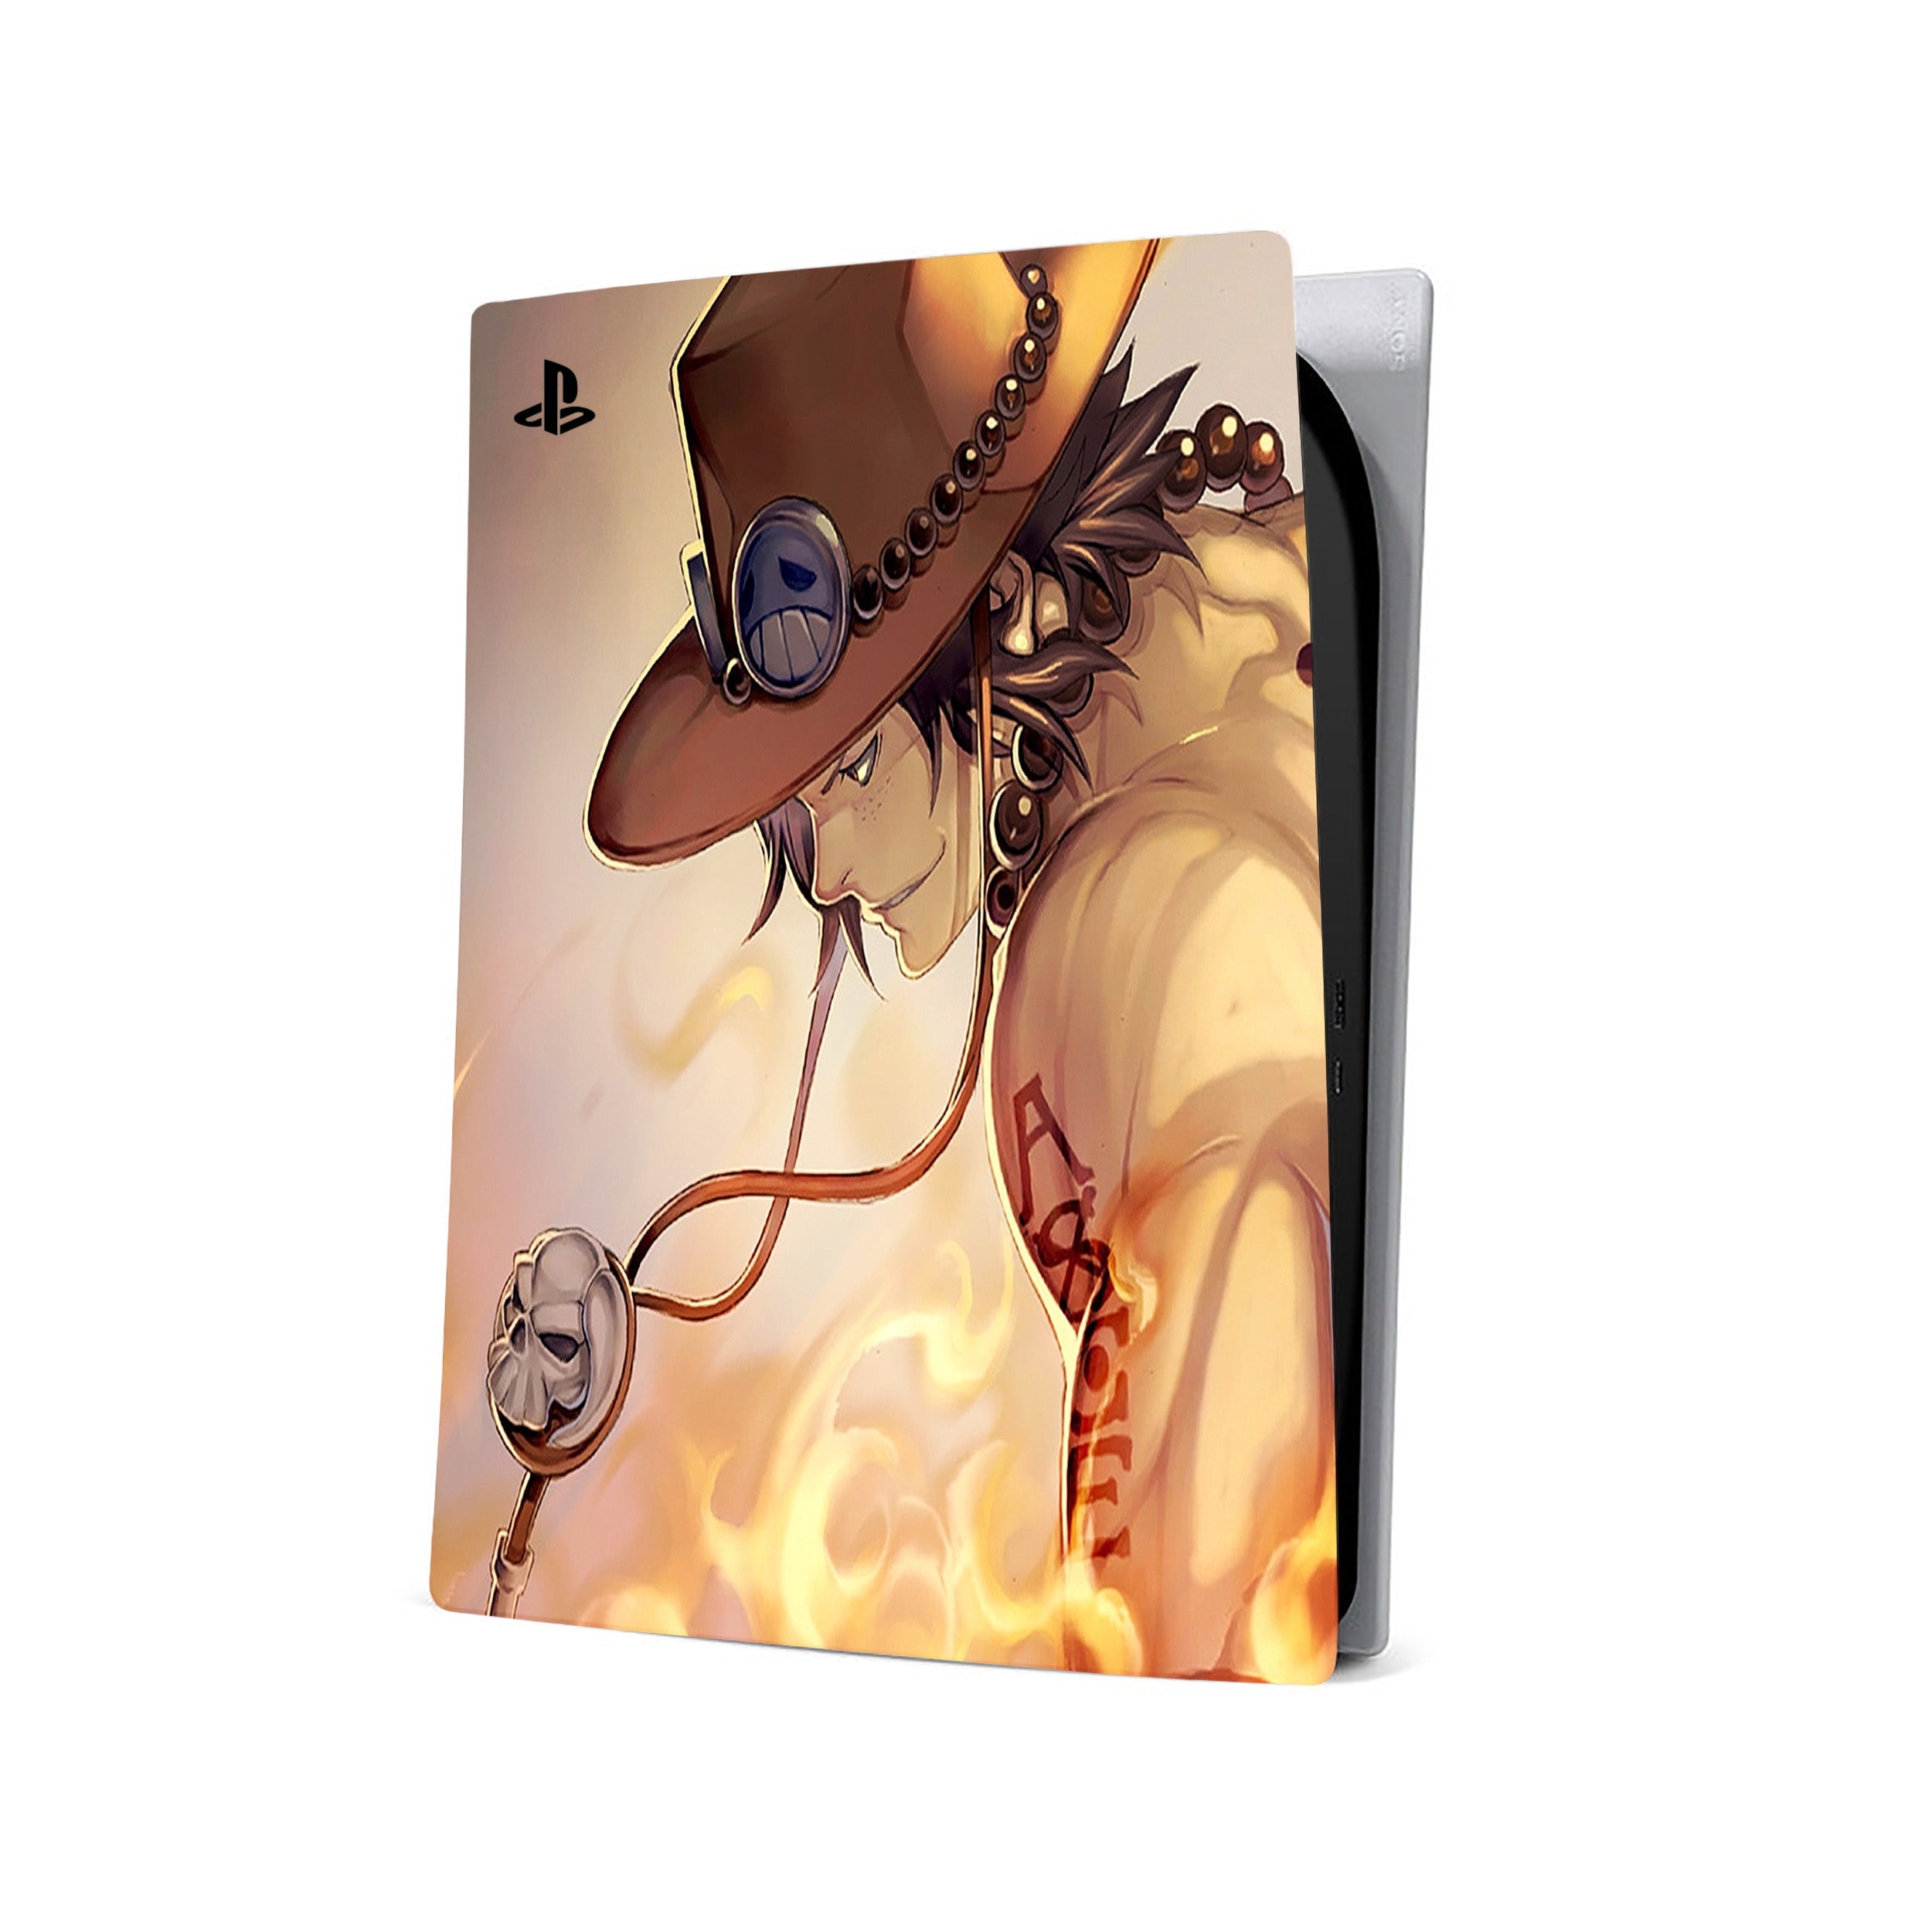 A video game skin featuring a One Piece Portgas D Ace design for the PS5.